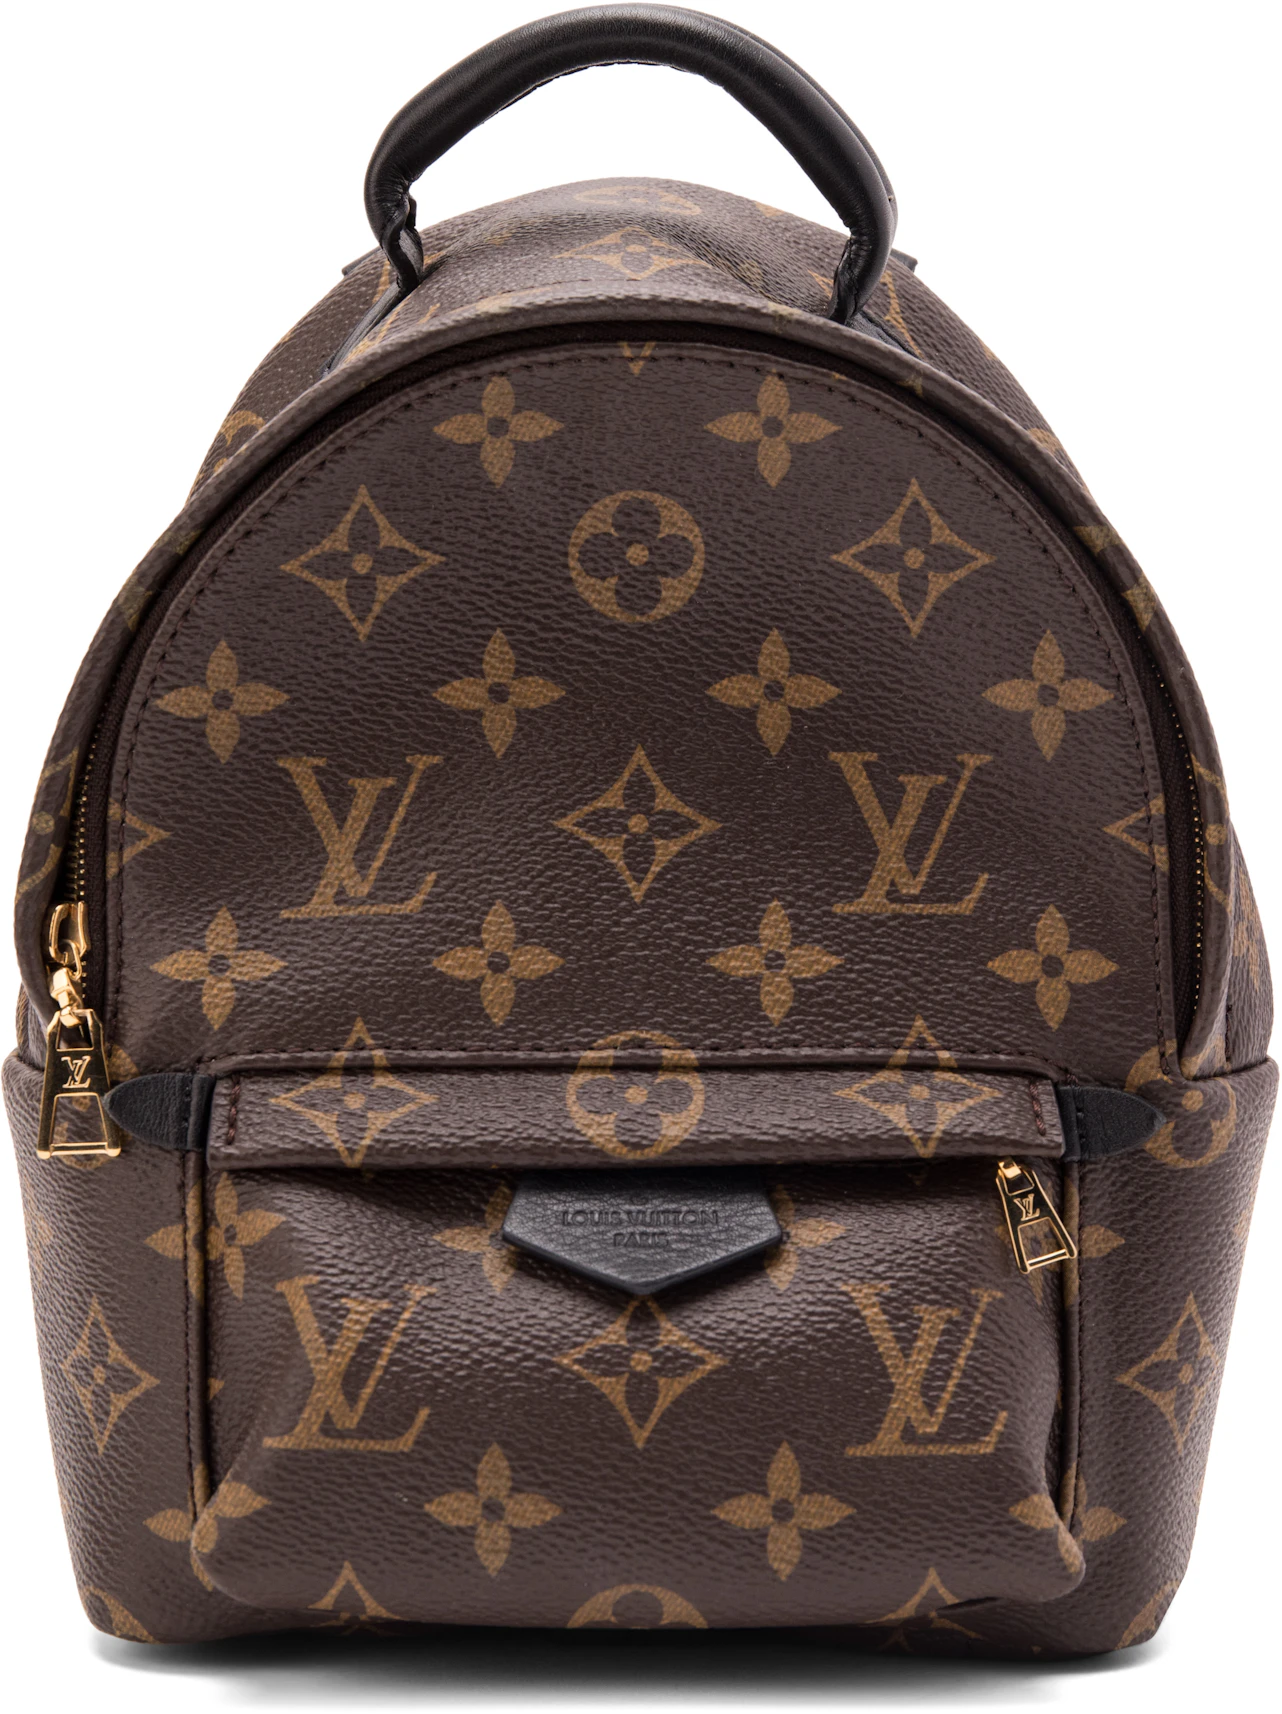 The Louis Vuitton Palm Springs Mini Backpack Is The Bag Of, 48% OFF